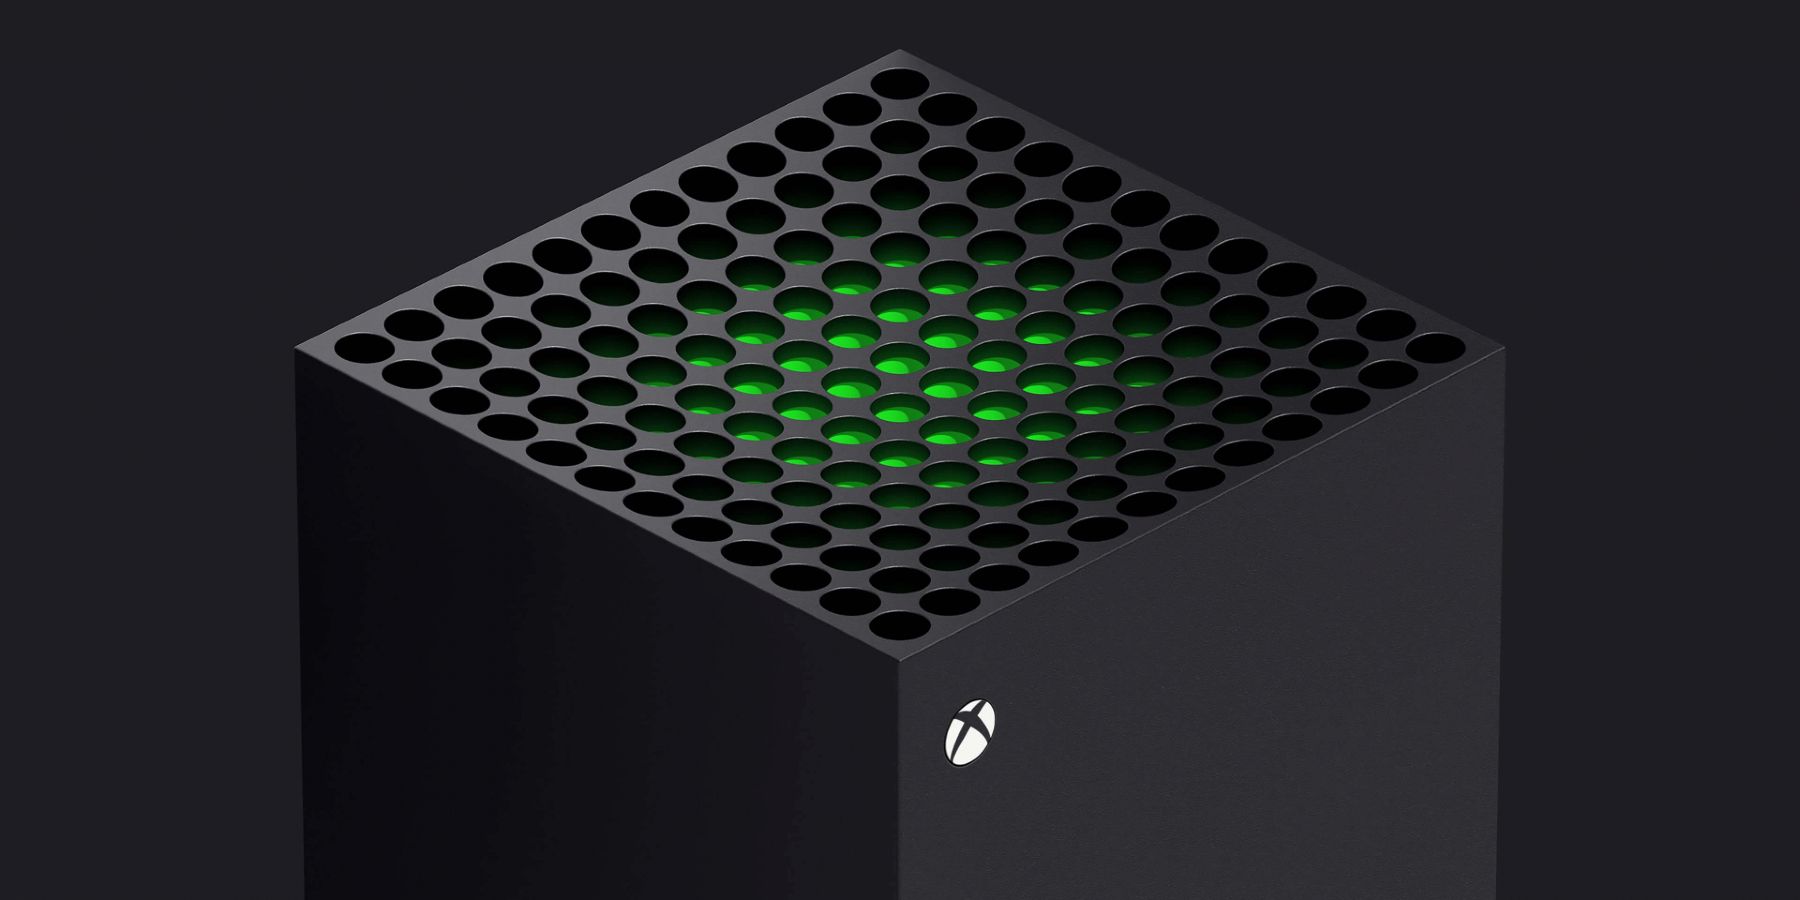 Top view of the Xbox Series X